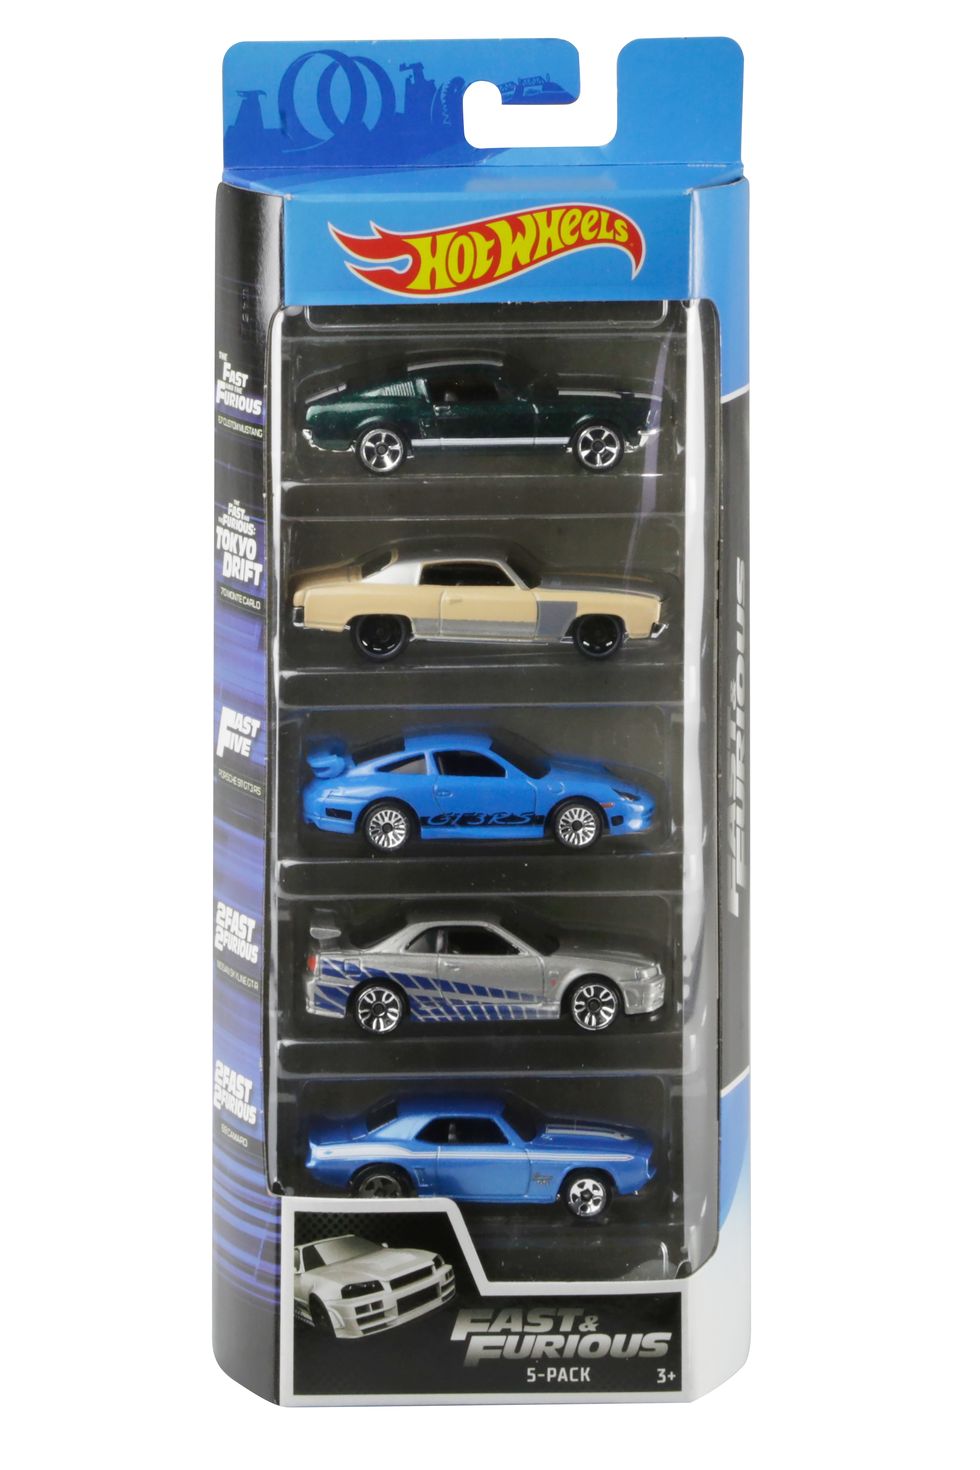 https://hips.hearstapps.com/hmg-prod/images/fast-and-furious-hot-wheels-106-1582091864.jpg?crop=0.4444620587613612xw:1xh;center,top&resize=980:*